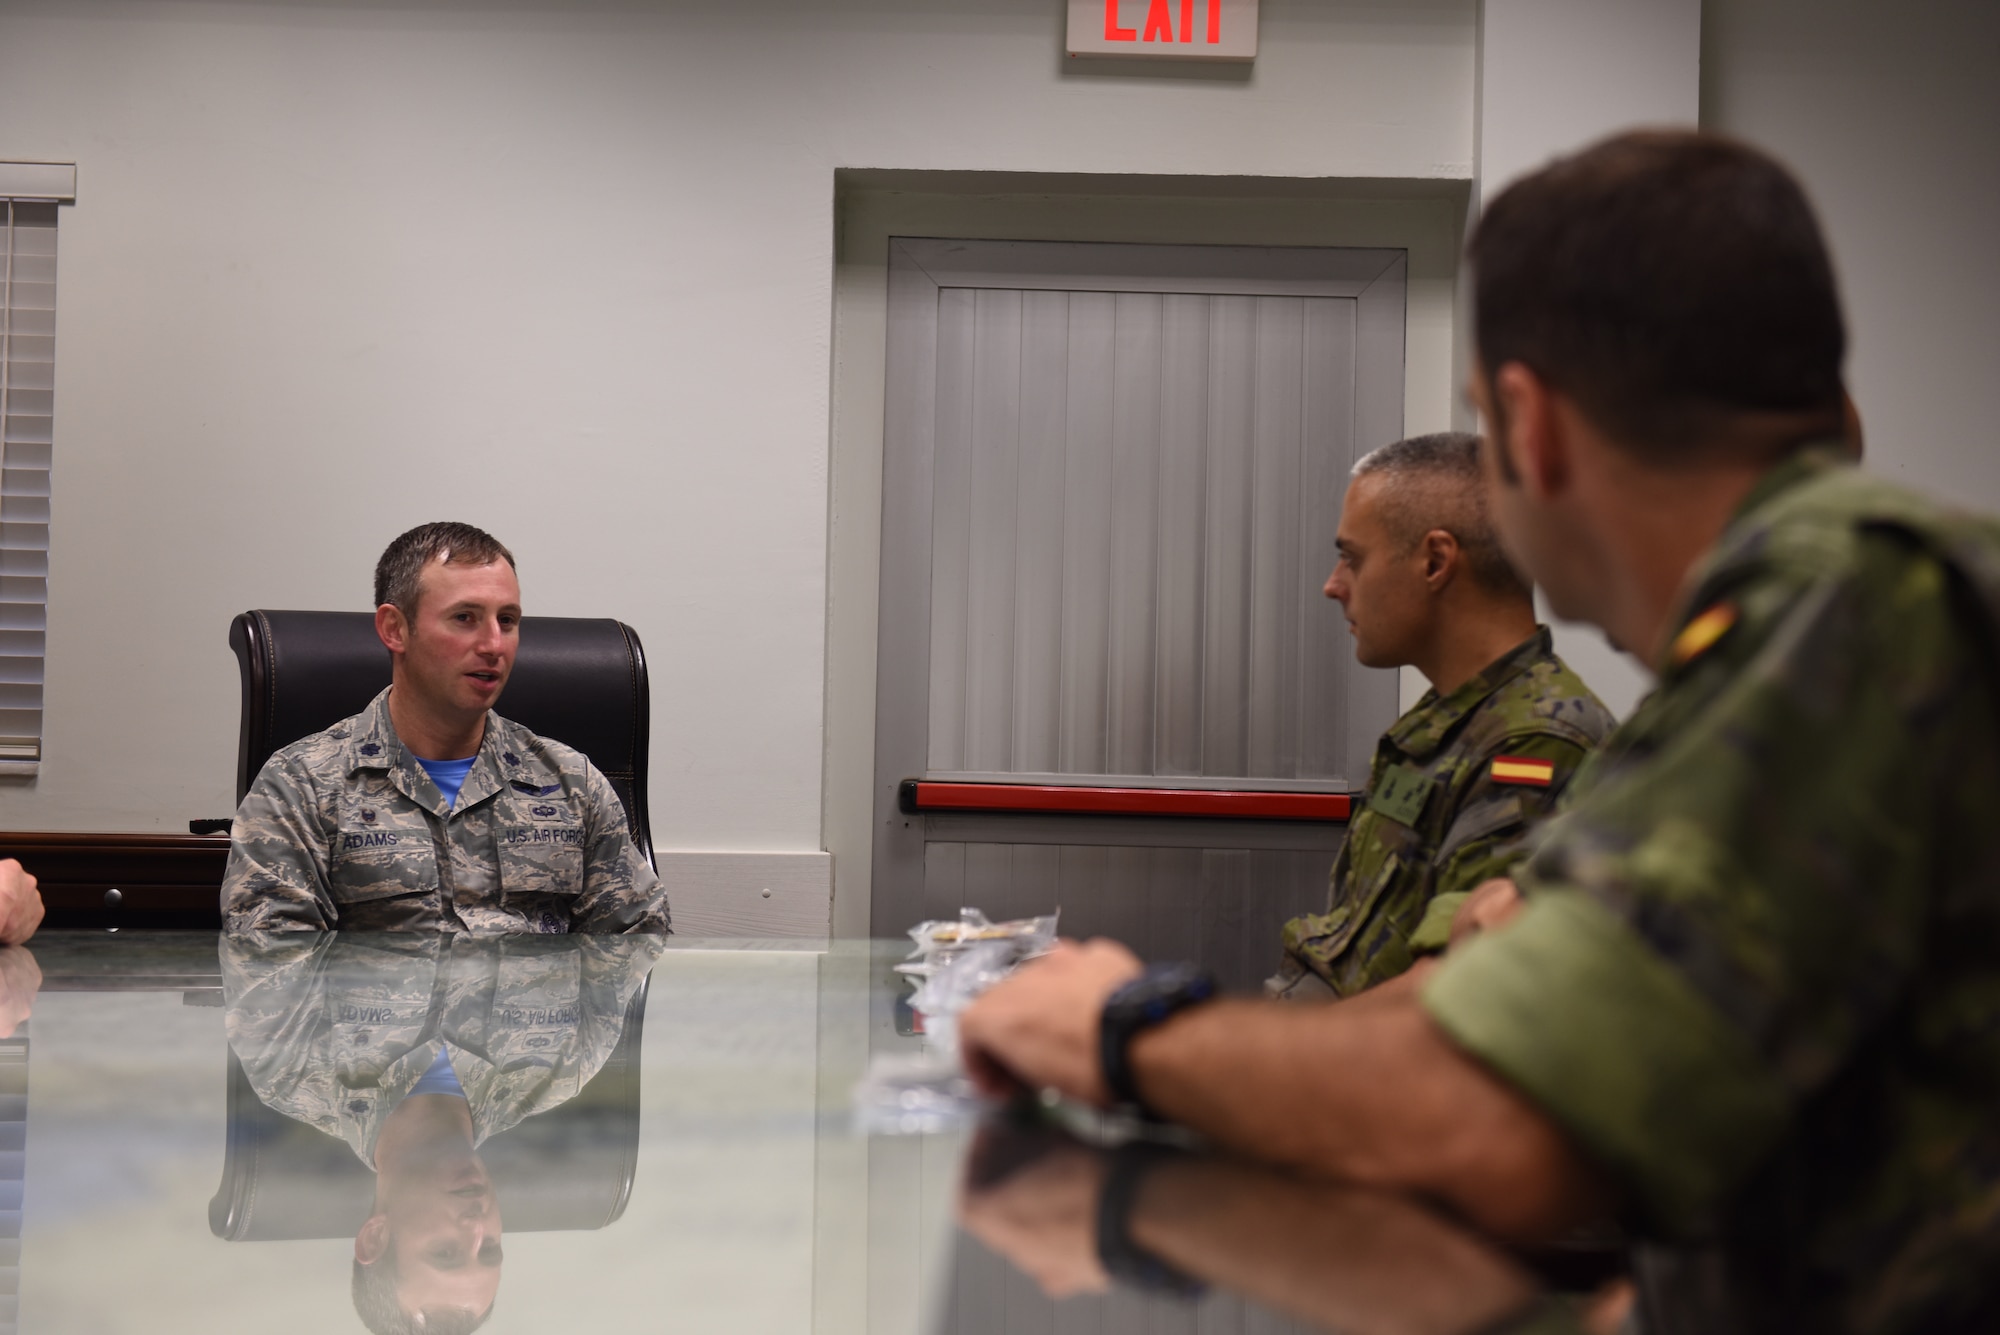 U.S. Air Force Lt. Col. Isaac Adams, 728th Air Mobility Squadron commander, briefs members of the Spanish Army on the unit’s mission at Incirlik Air Base, Turkey, Sept. 7, 2018.